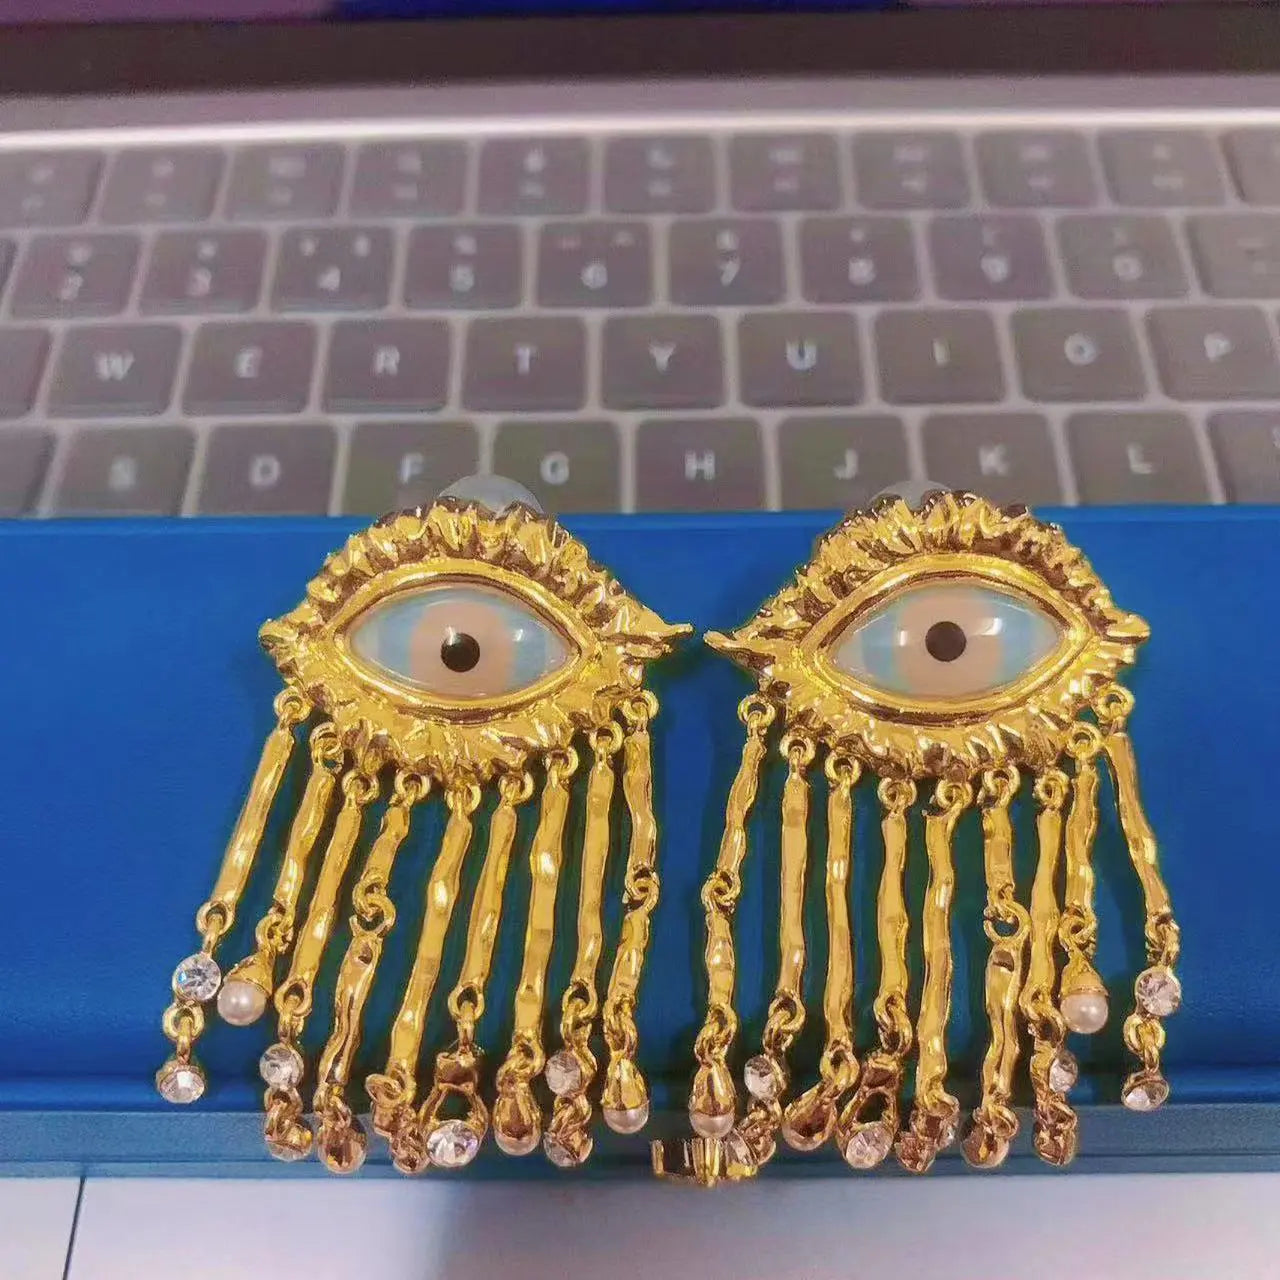 Schiap- the Surrealist Eye (and Nose!) Shaped Earrings and Ring